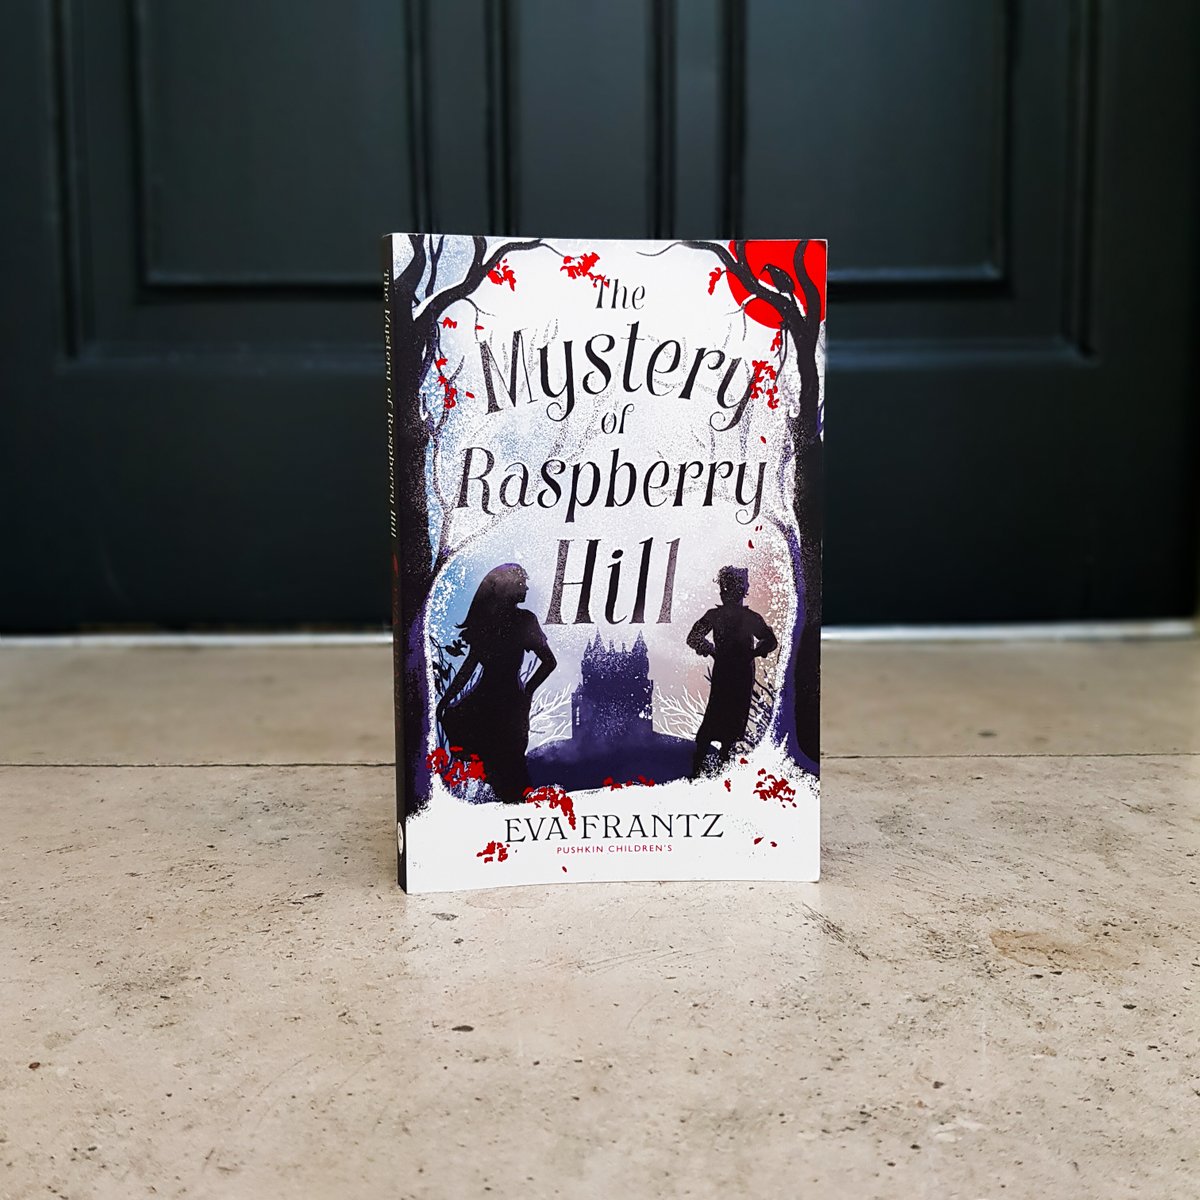 OUT NOW for younger readers! The Mystery of Raspberry Hill by @FruFrantz is a thrilling gothic mystery set in a spooky sanatorium during the 1920s.👻 Readers have described it as: 'A touching and quick read' 'Enough to make you feel goosebumps' 'Enrapturing from start to finish'